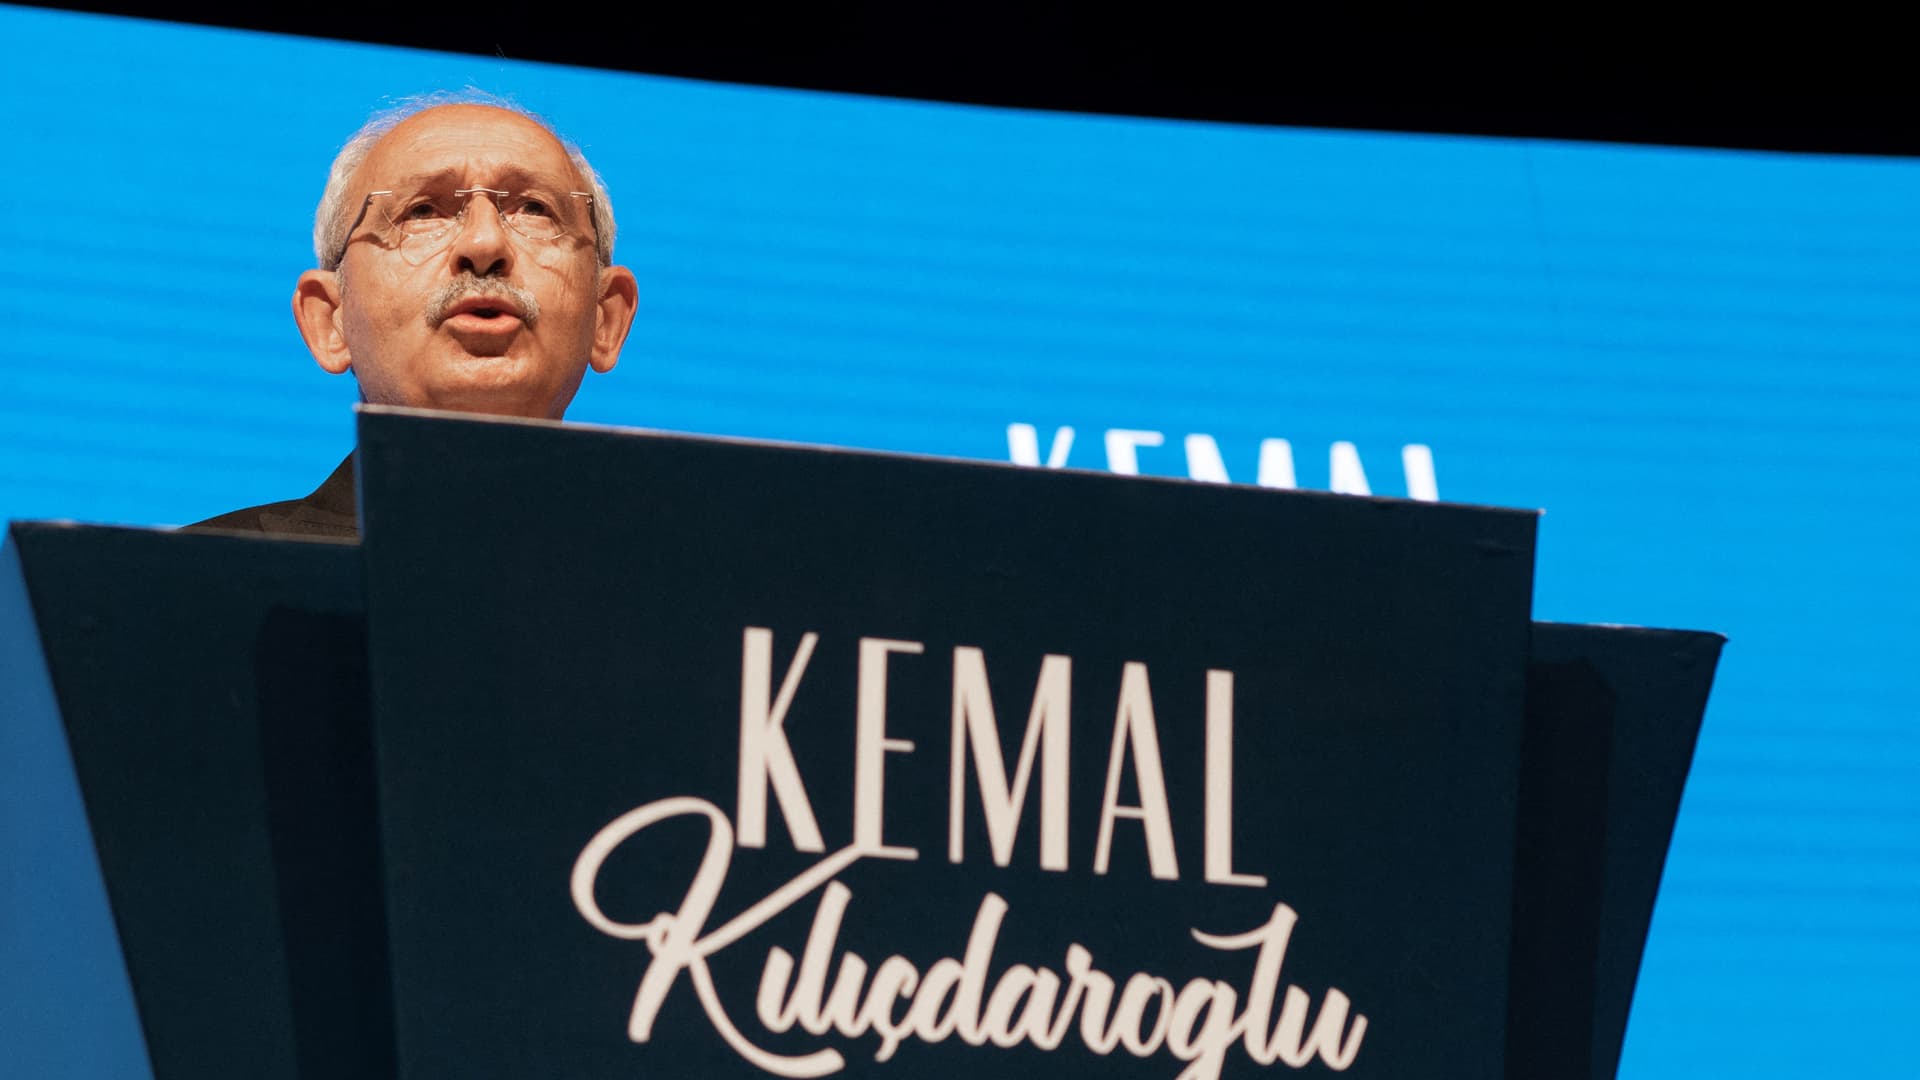 Kemal Kilicdaroglu, the 74-year-old leader of the center-left, pro-secular Republican People's Party, or CHP, delivers a press conference in Ankara on May 15, 2023.